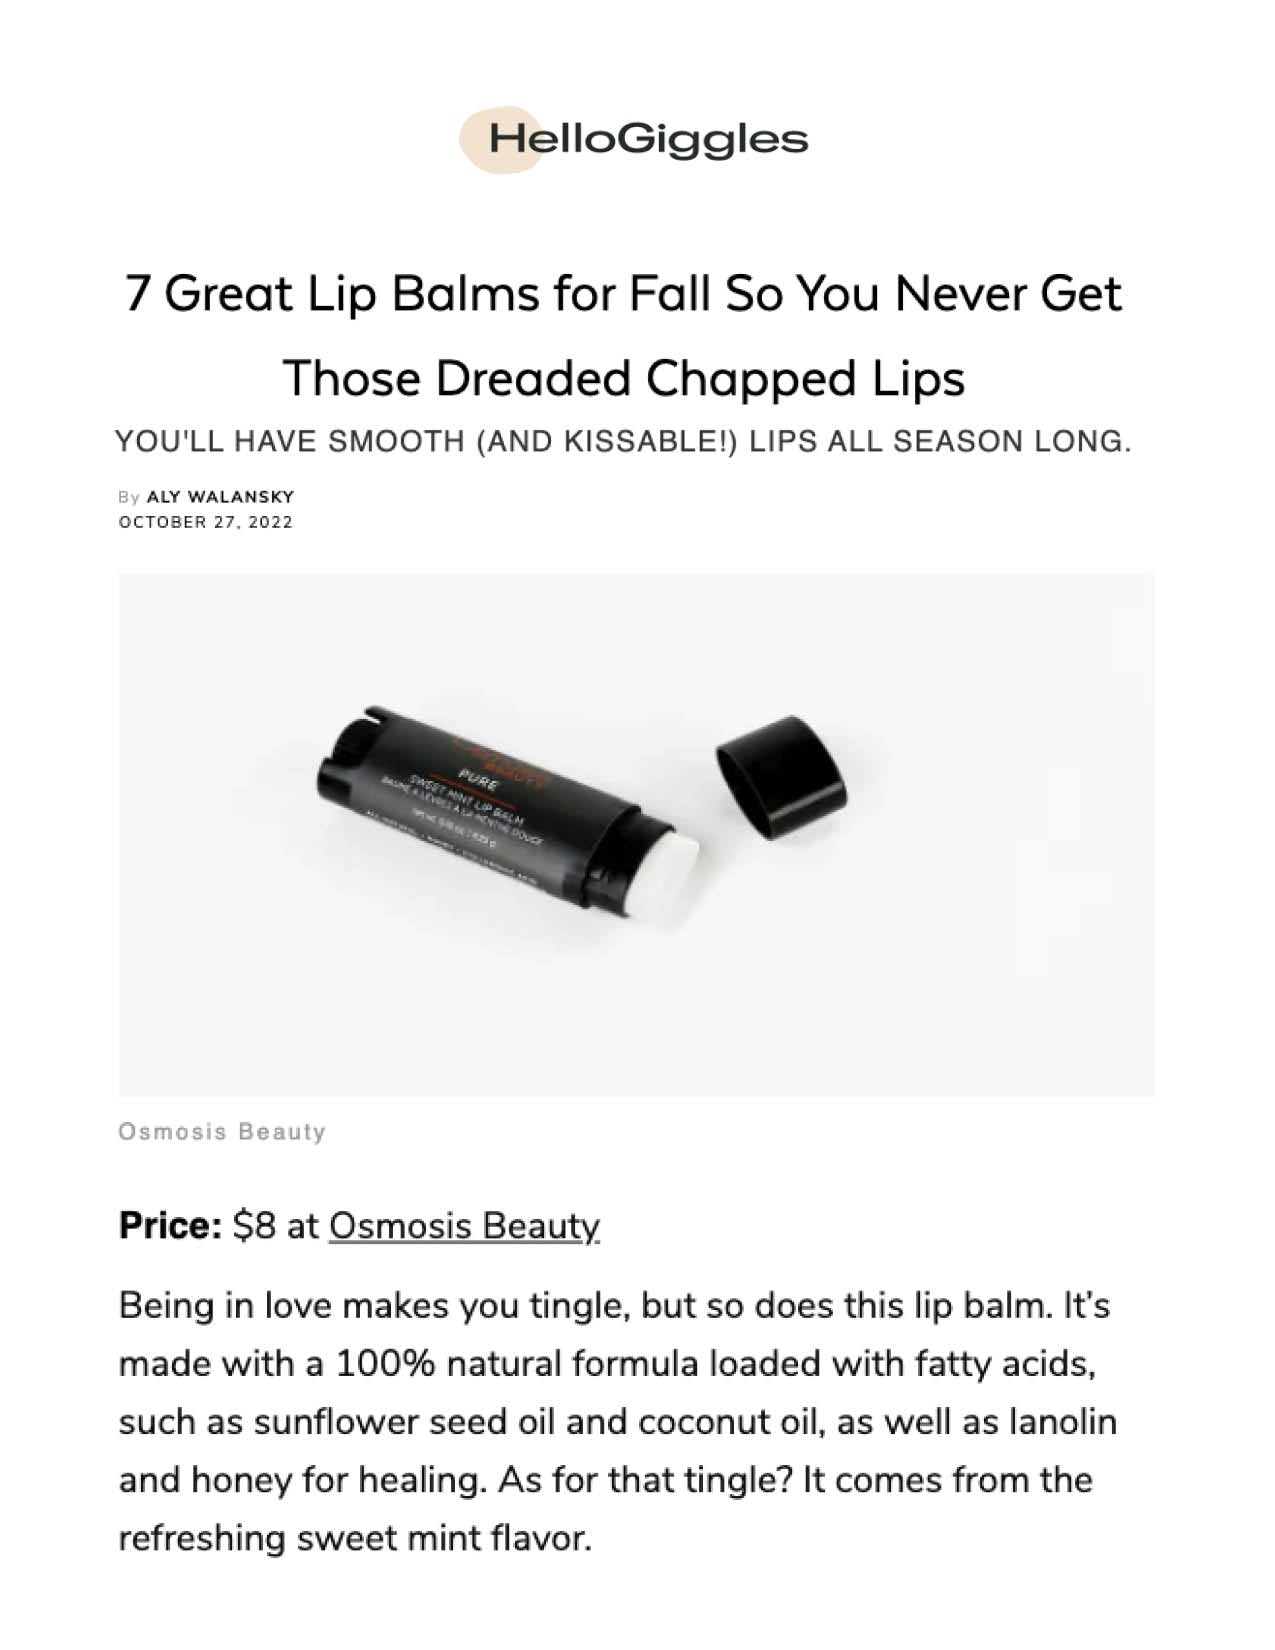 The Pure Lip Balm was featured in a roundup on HelloGiggles.com of the best lip balms for Fall